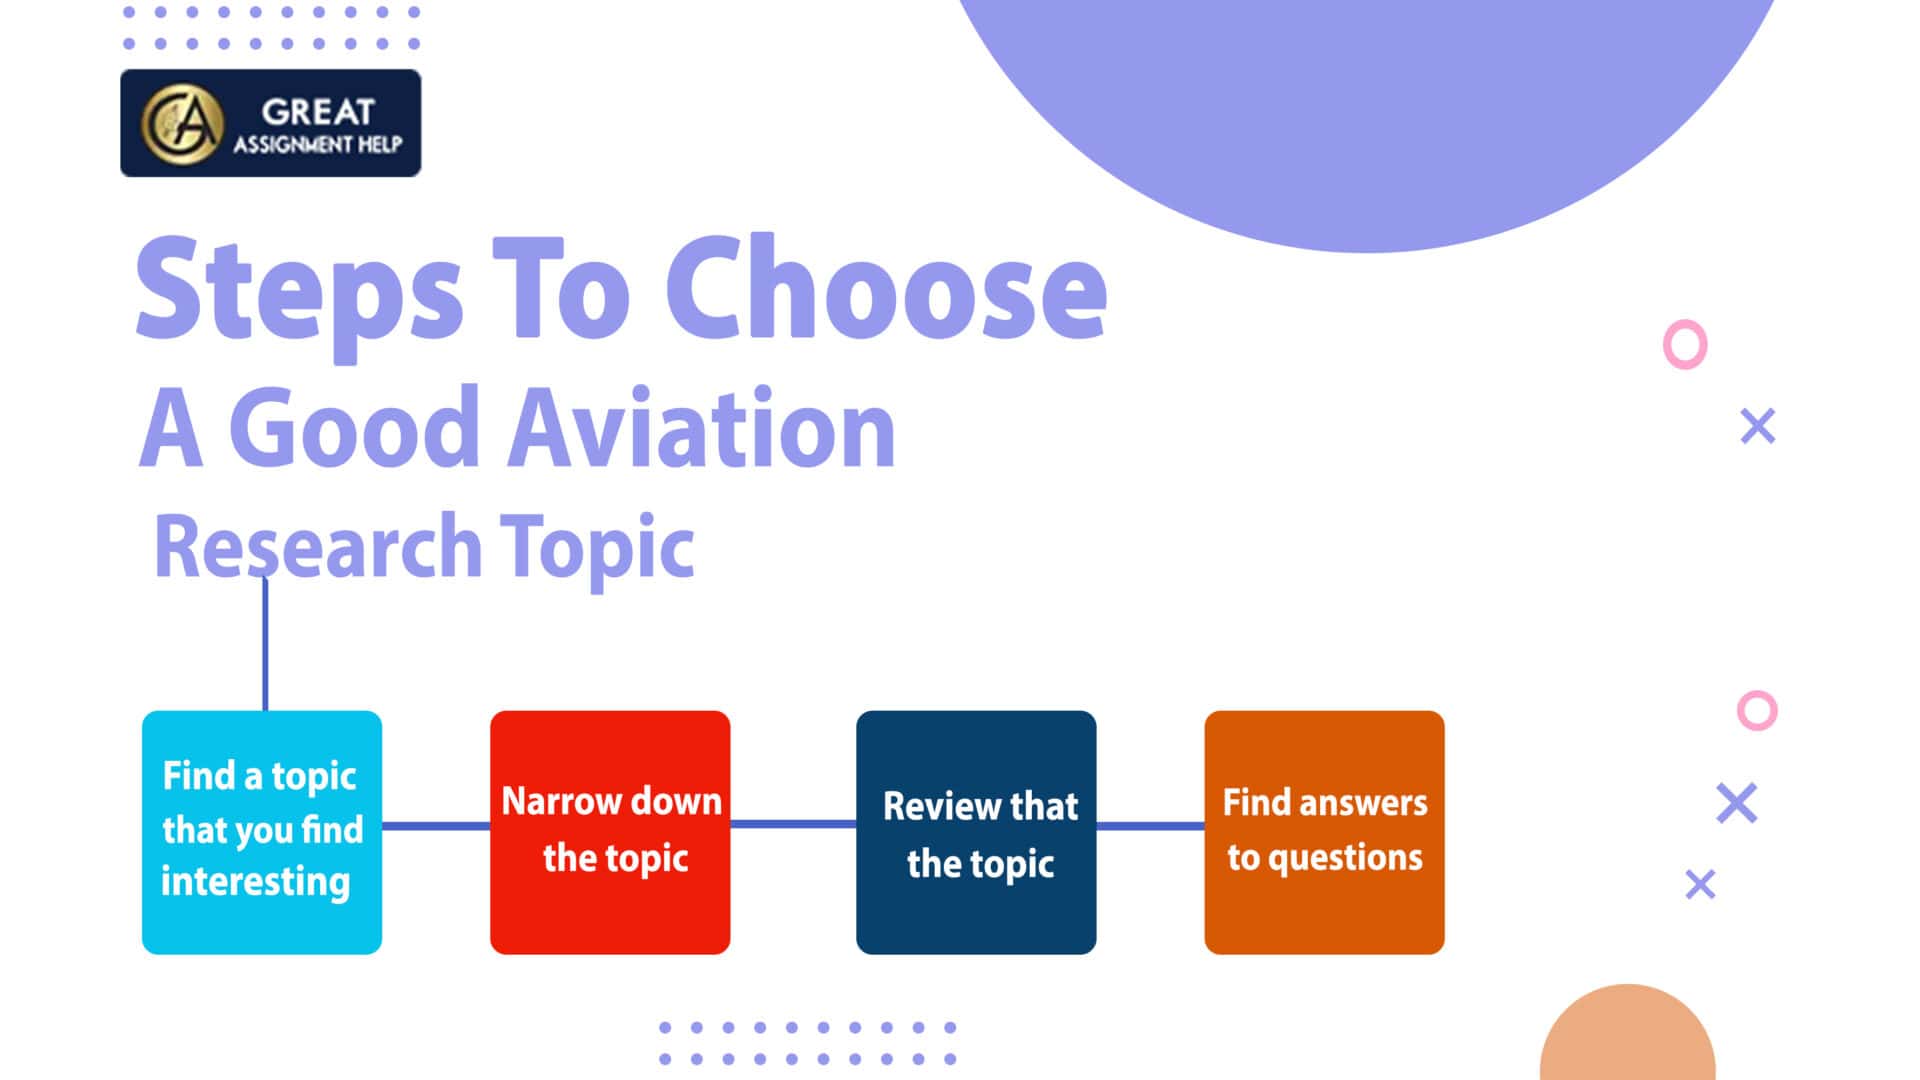 research topics for aviation management